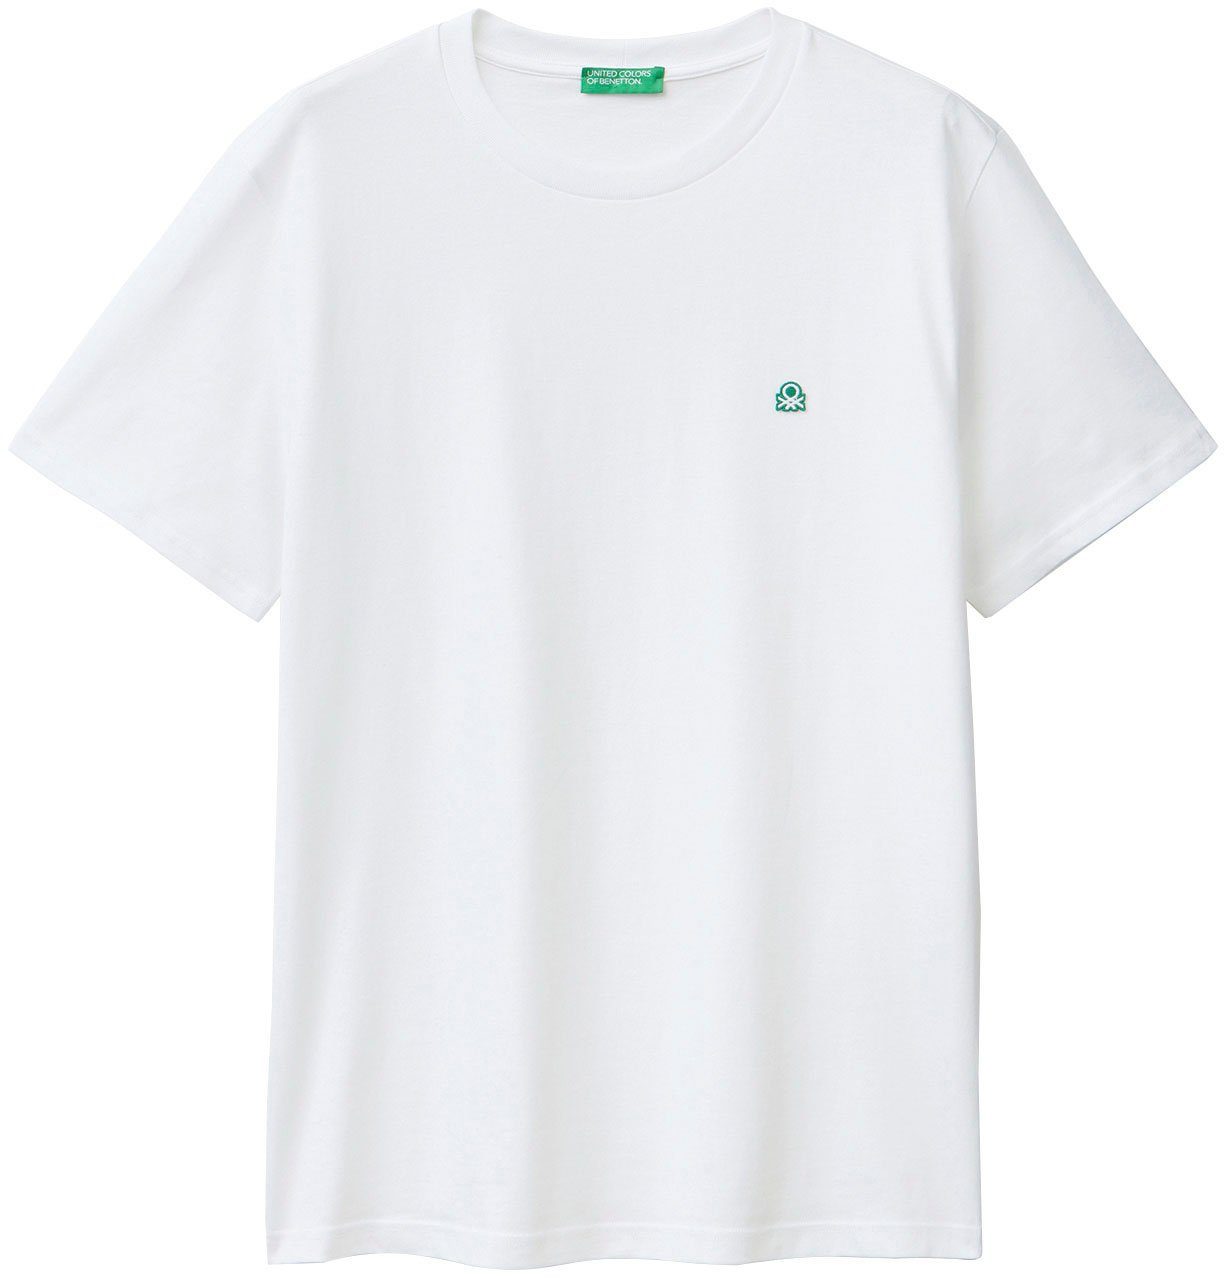 United Colors of Benetton T-Shirt mit Label-Badge